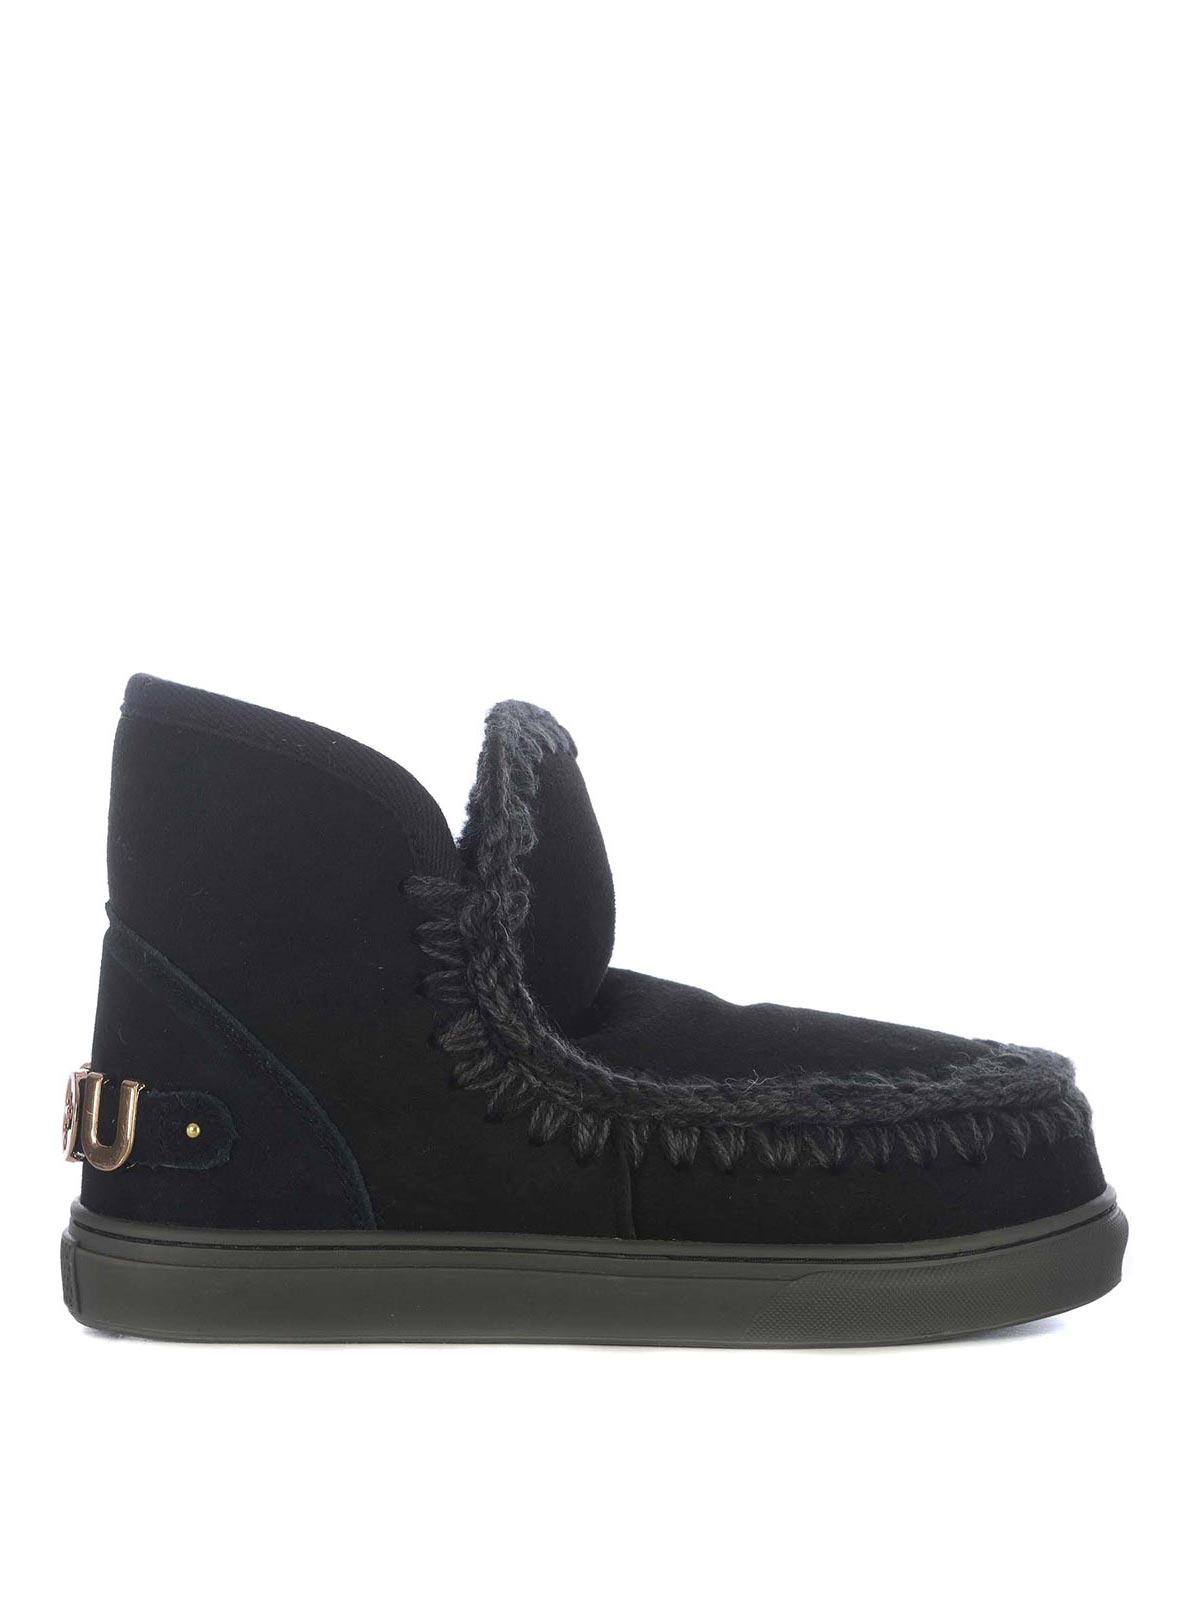 Shop Mou Ankle Boots   Made Of Leather In Black